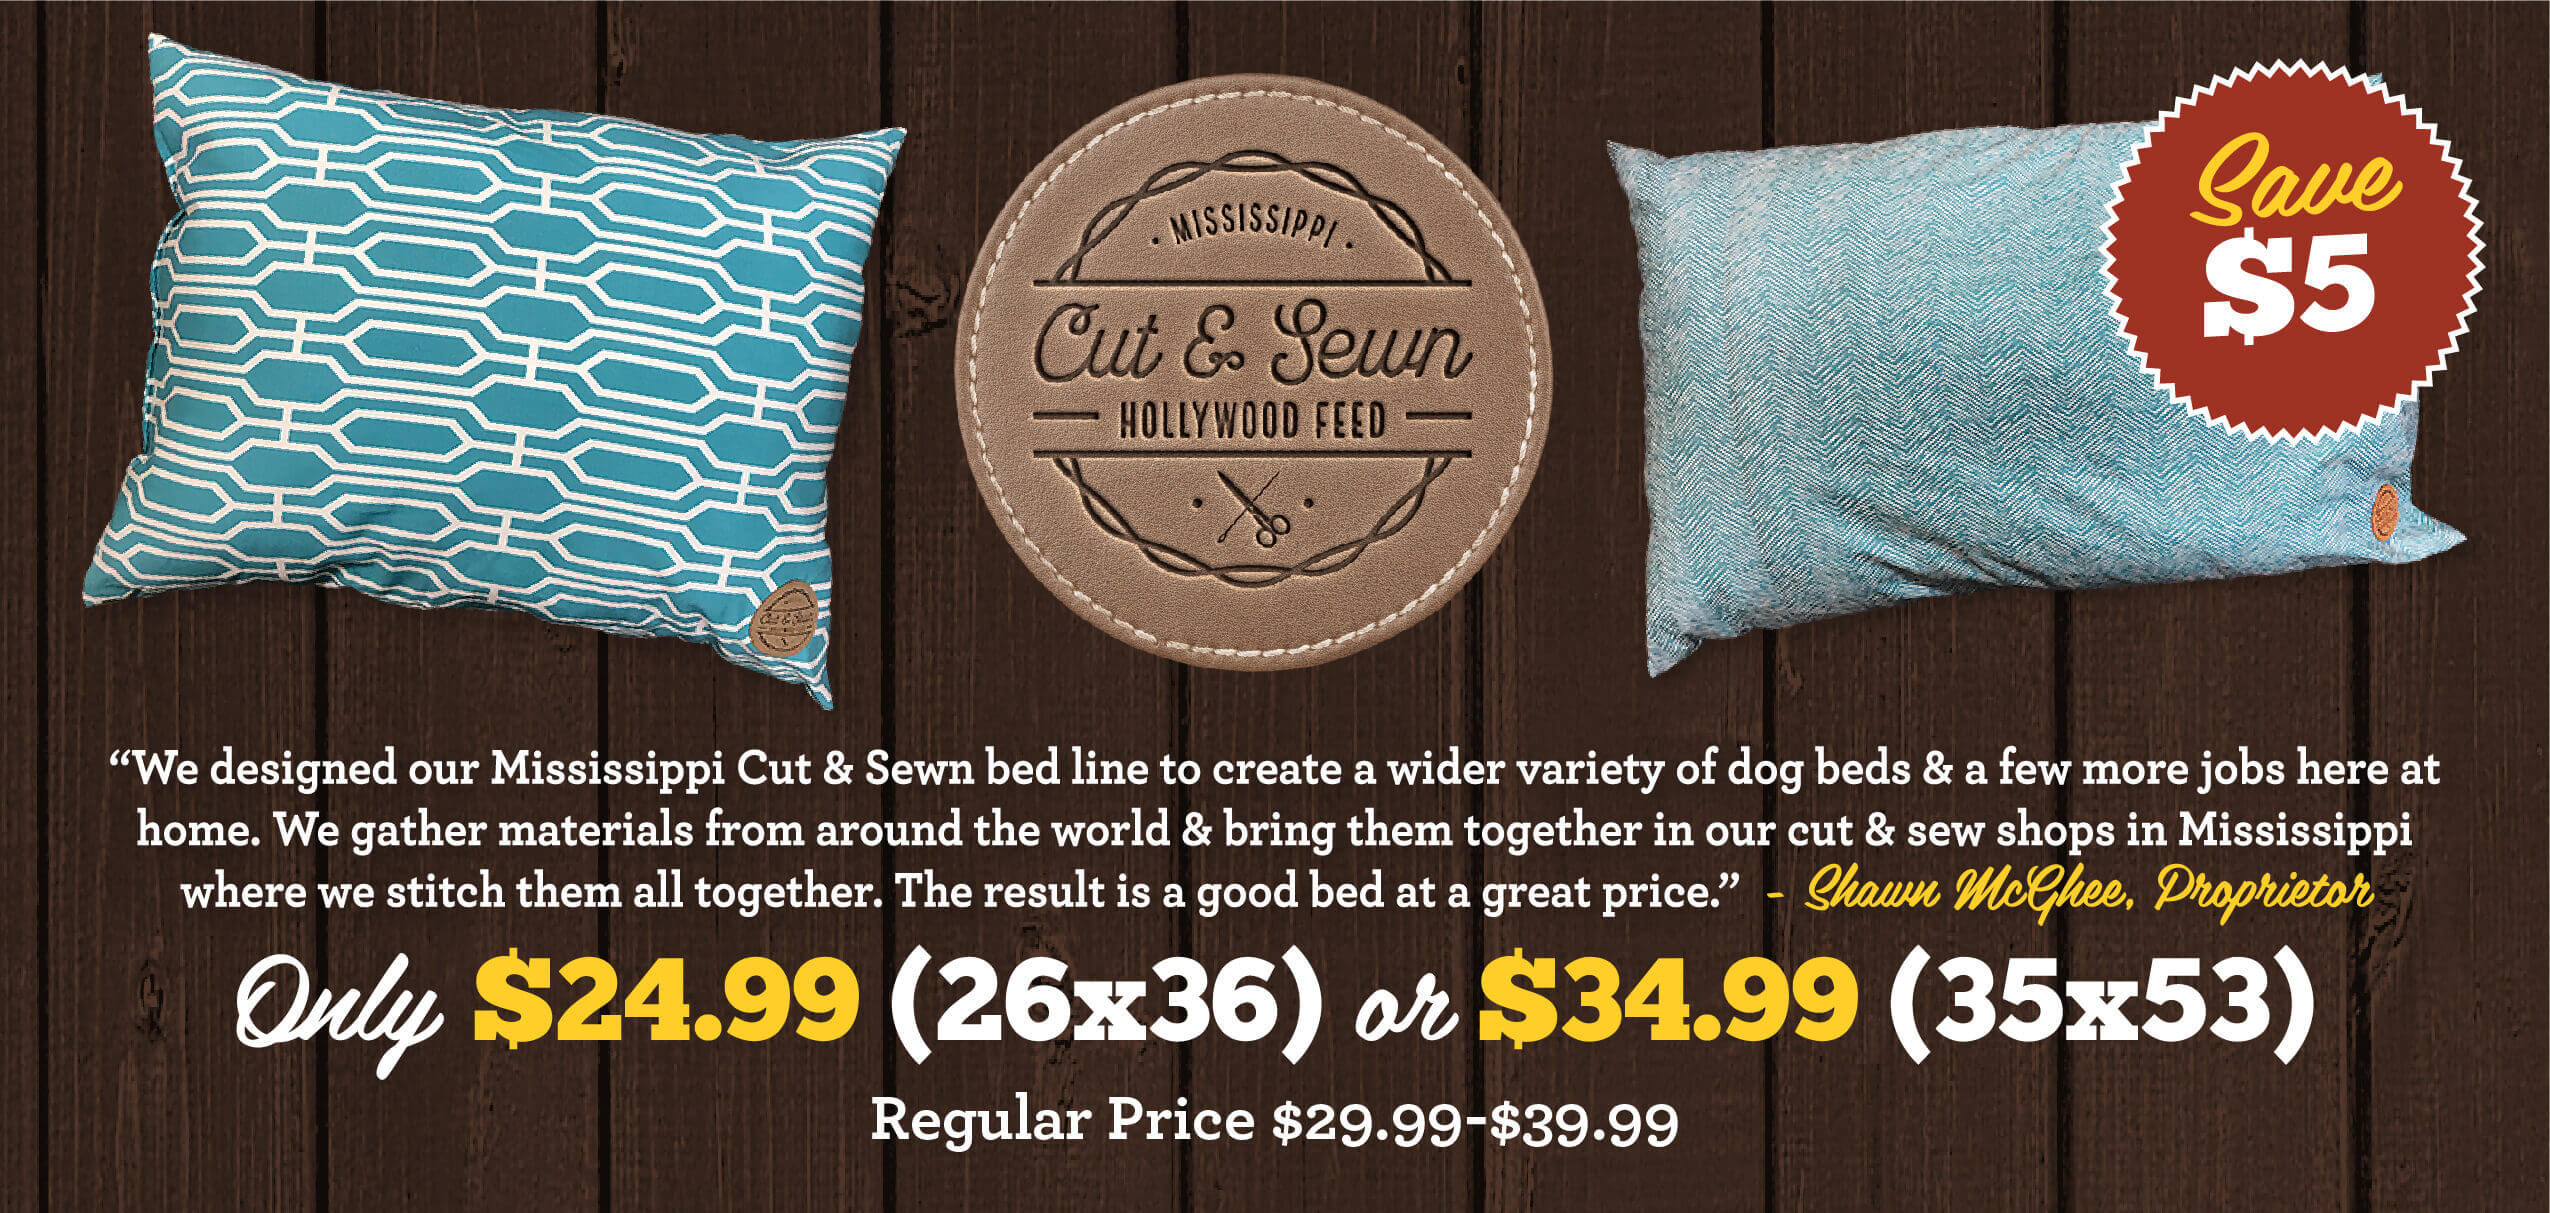 Hollywood Feed Cut & Sewn Pillow Beds - ONLY $24.99 (26x36) OR $34.99 (35x53)